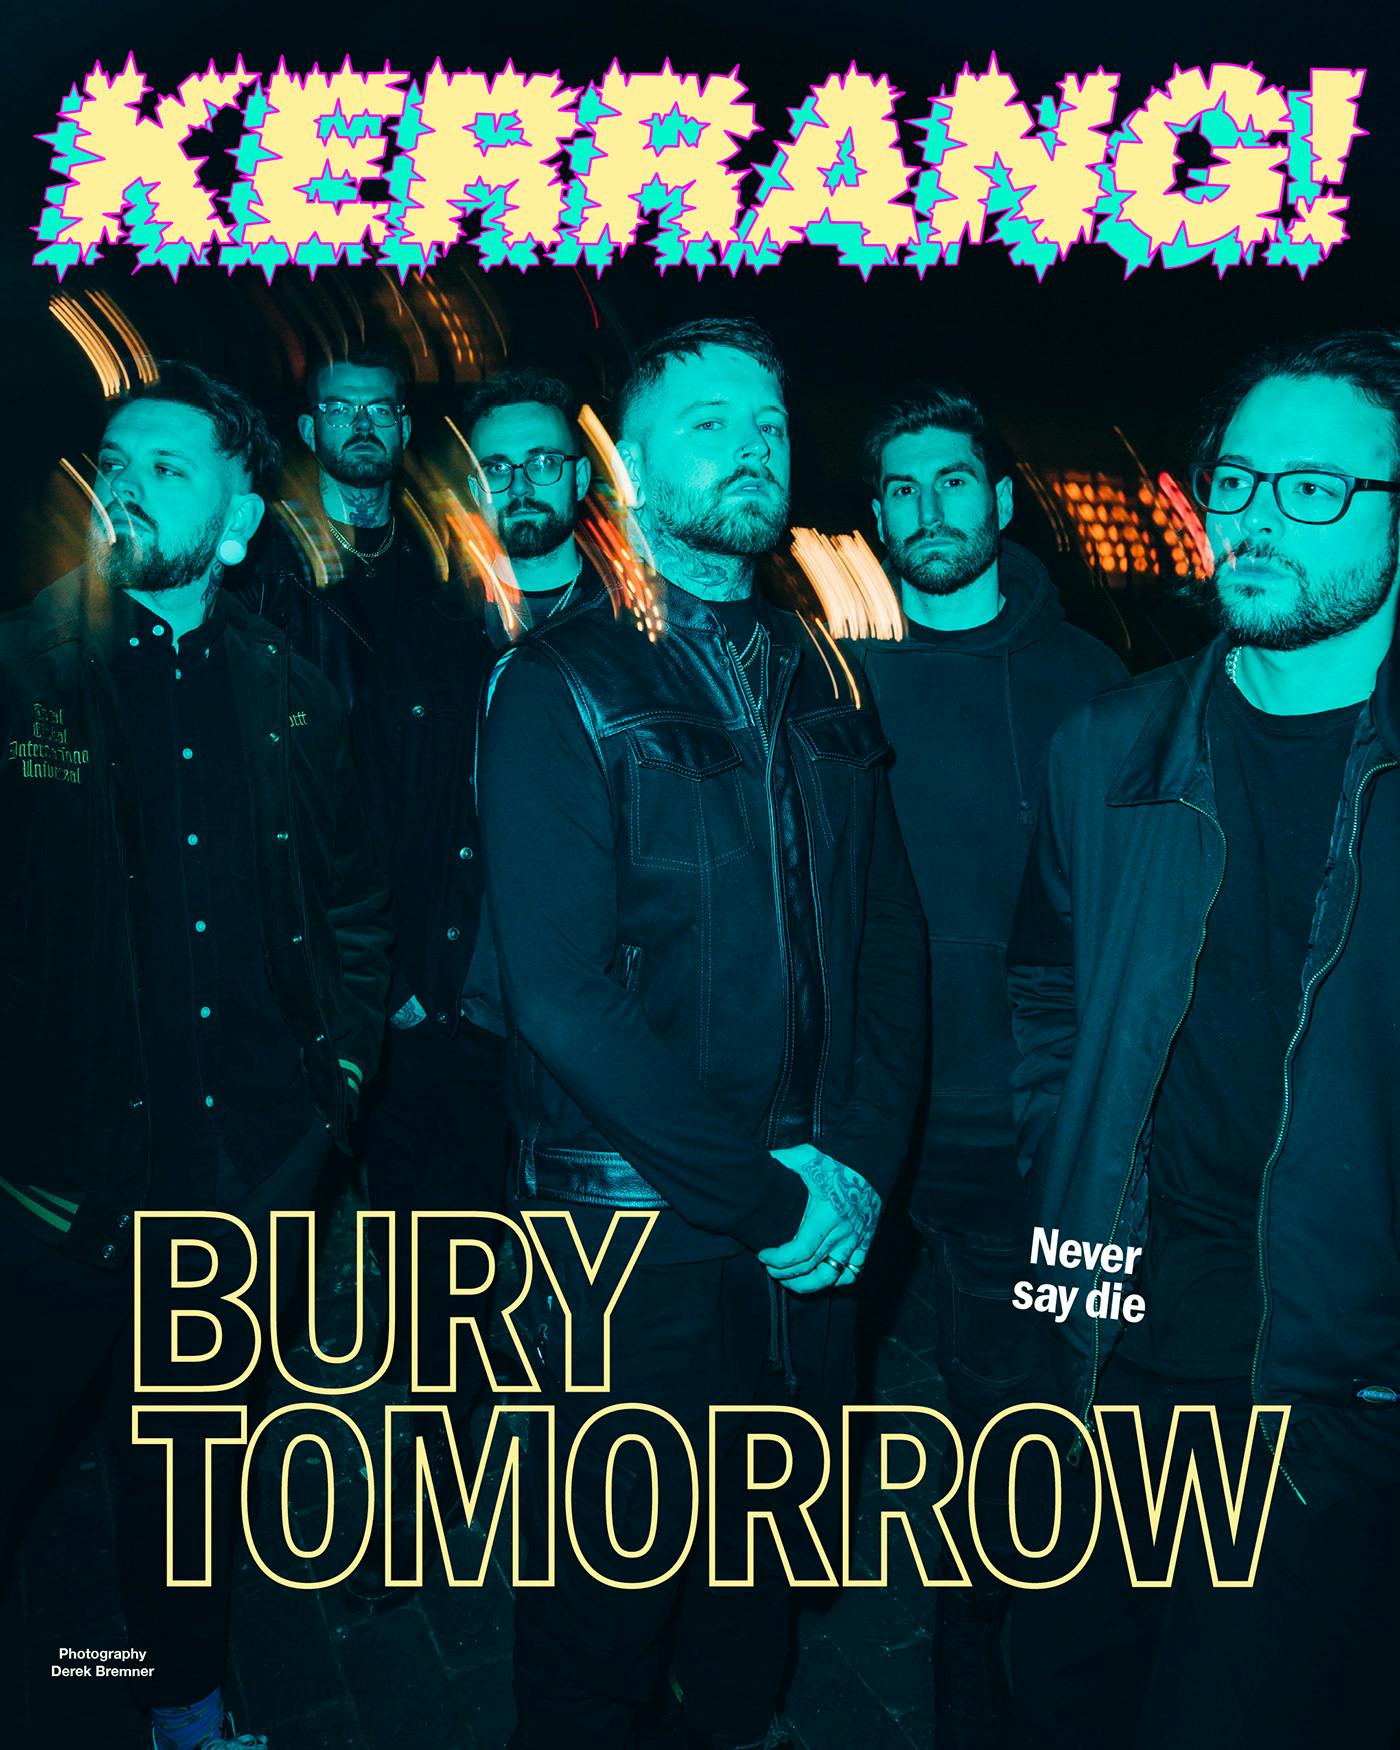 Bury Tomorrow: “I want to promise you, our band is never giving up”